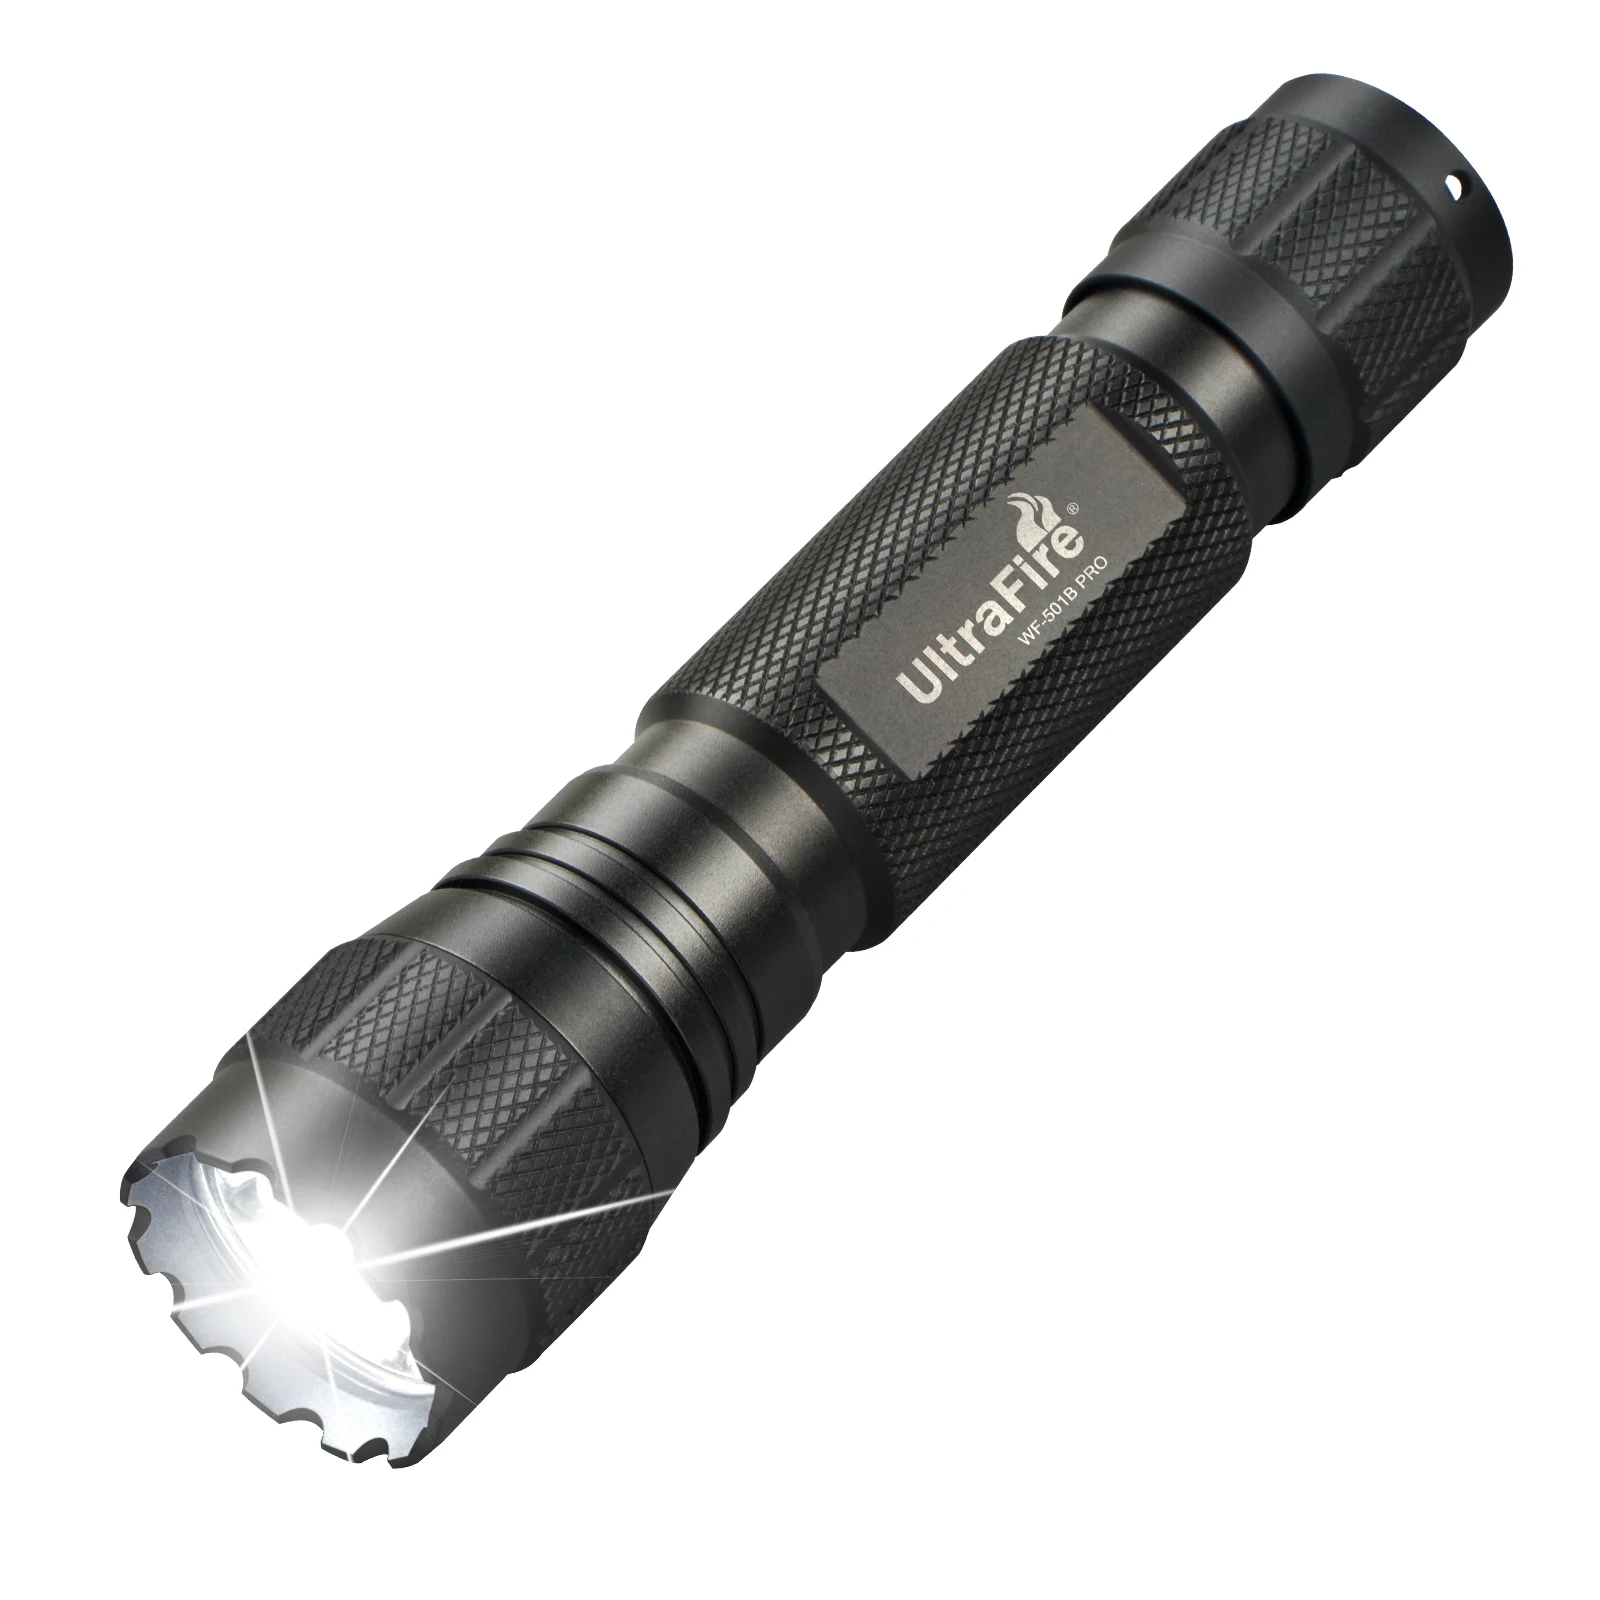 

UltraFire WF-501B Pro Army Tactical Flashlight 1200LM 1 Mode Powerful Military Lamp 18650 LED Emergency Spotlights Camping Torch